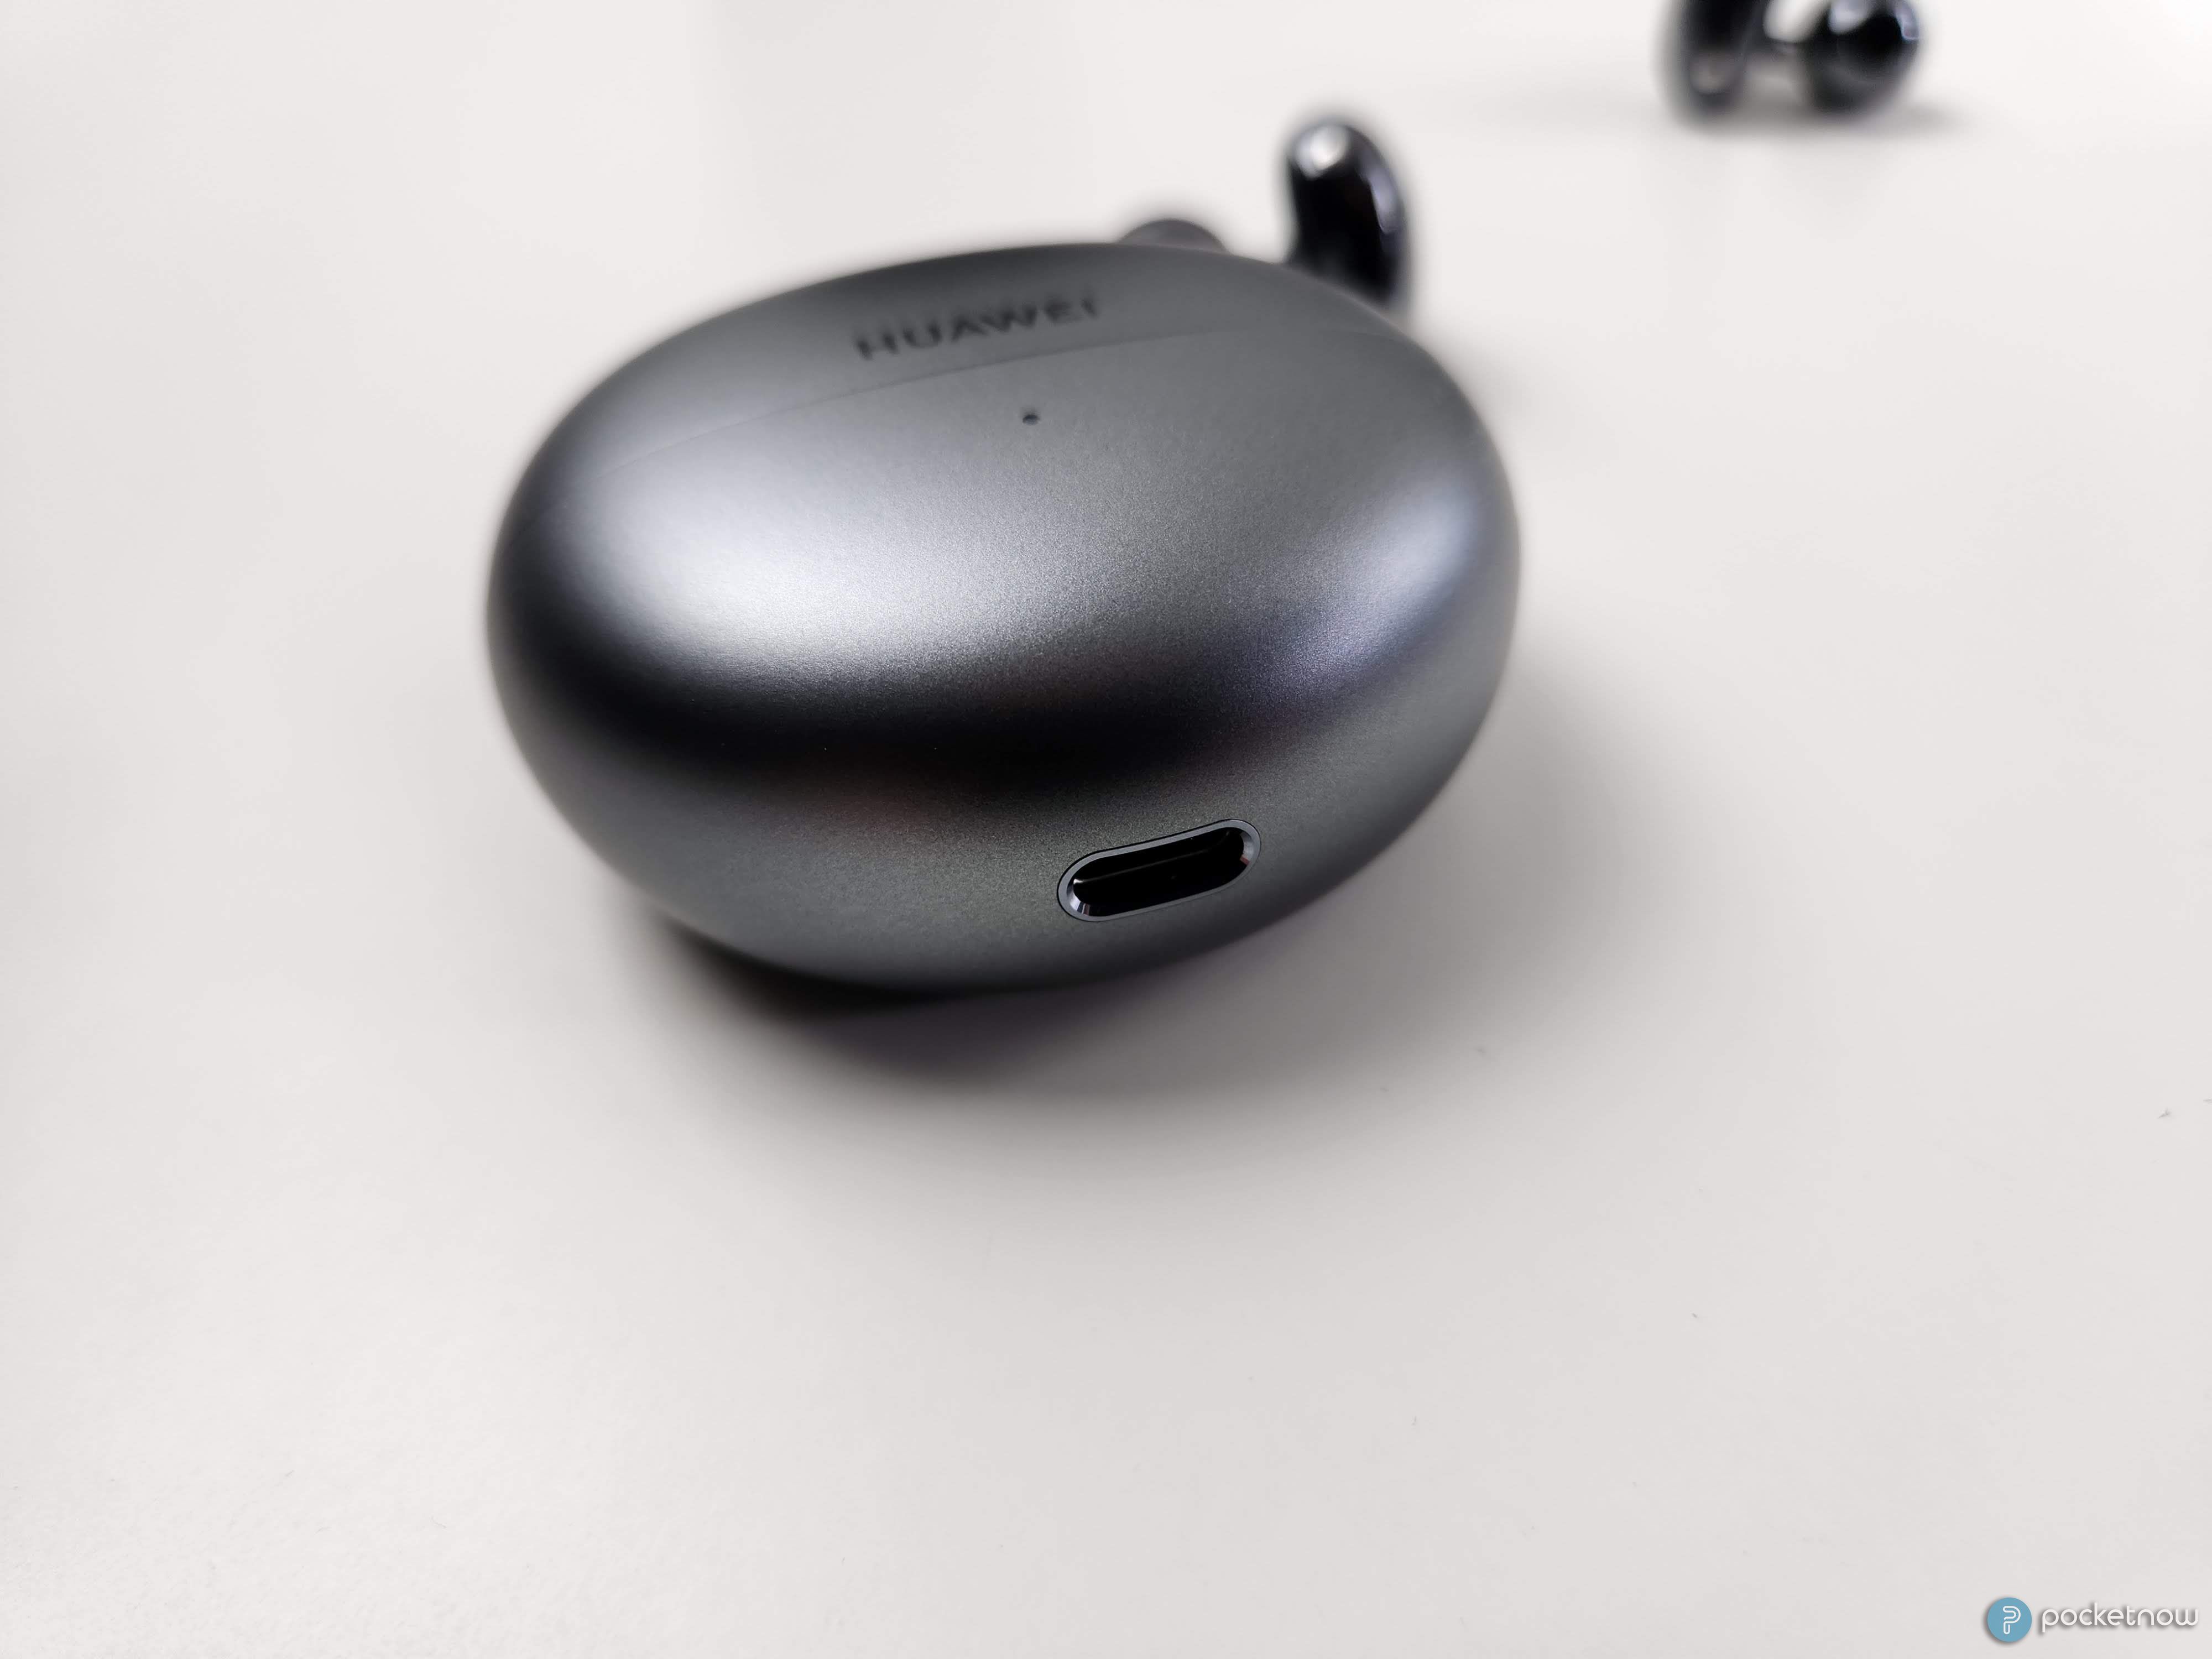 HUAWEI FreeClip review: The most comfortable wireless earbuds?